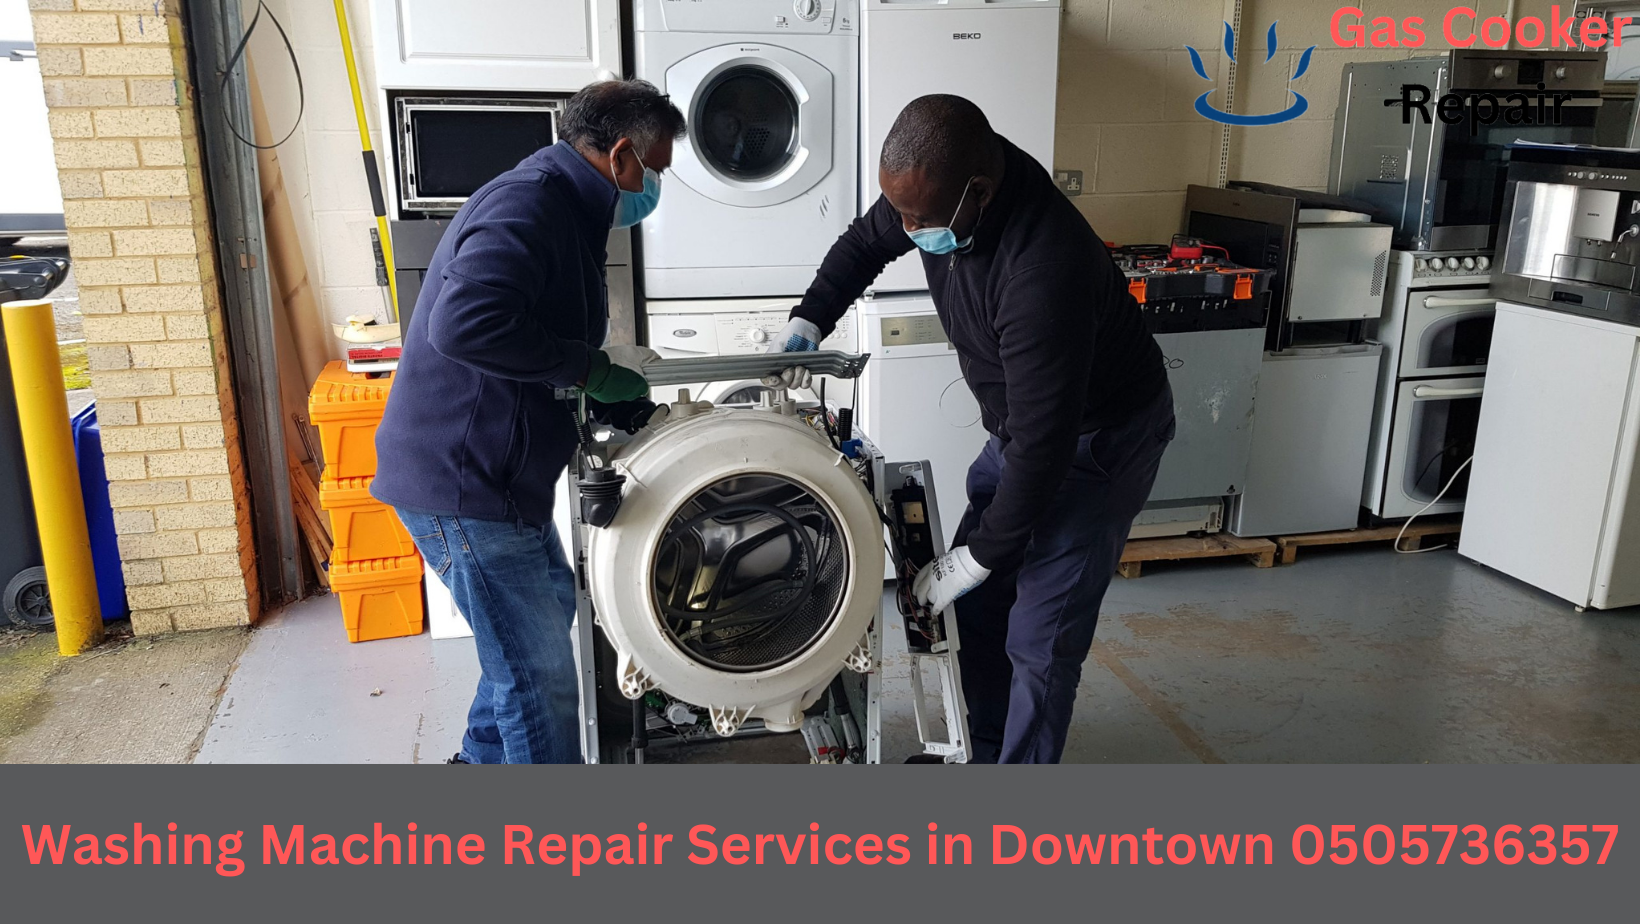 Washing Machine Repair Services in Downtown